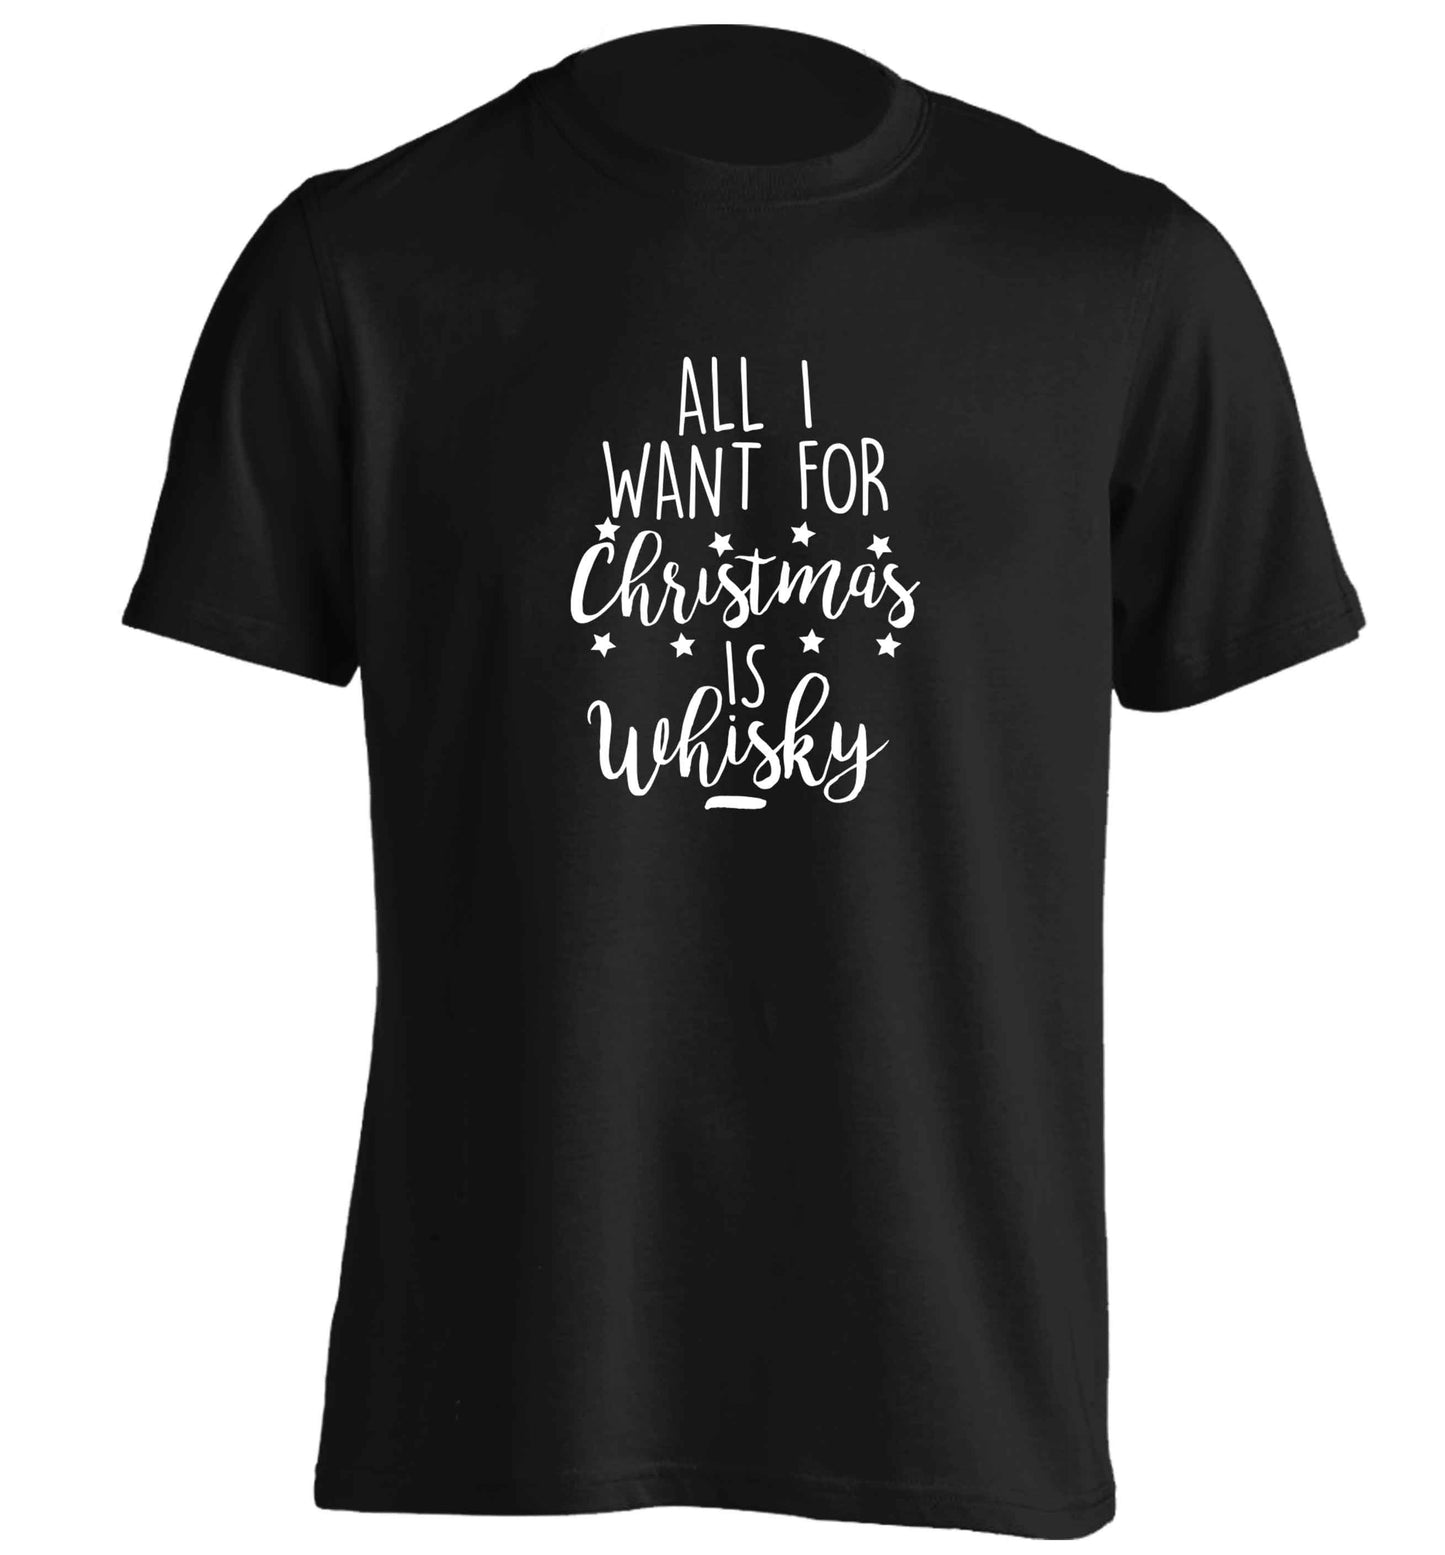 All I want for Christmas is whisky adults unisex black Tshirt 2XL